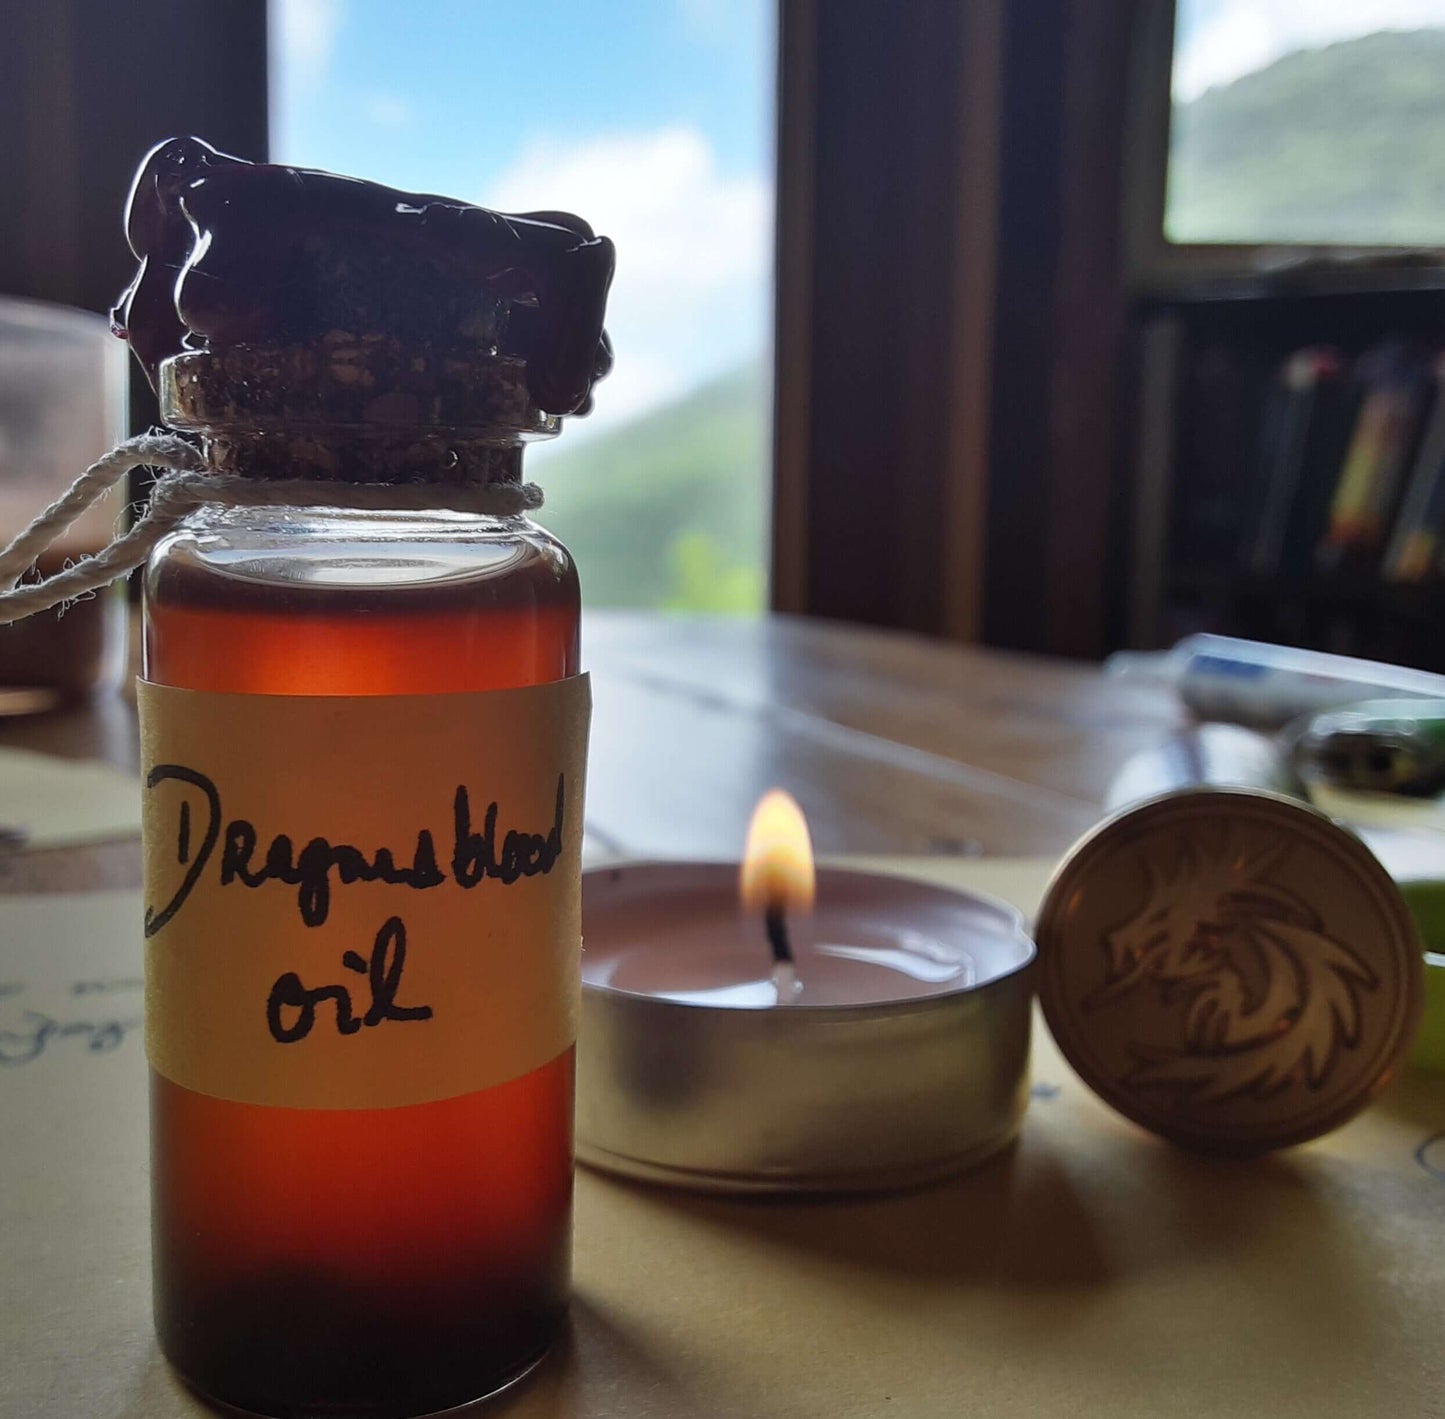 Dragon's Blood Resin Oil, Ritual, infused in Sunflower oil, Daemonorops Draco, Protection Oil, Banishing Oil, Full Moon Mars in Aquarius - Athena's Herbal Alchemy